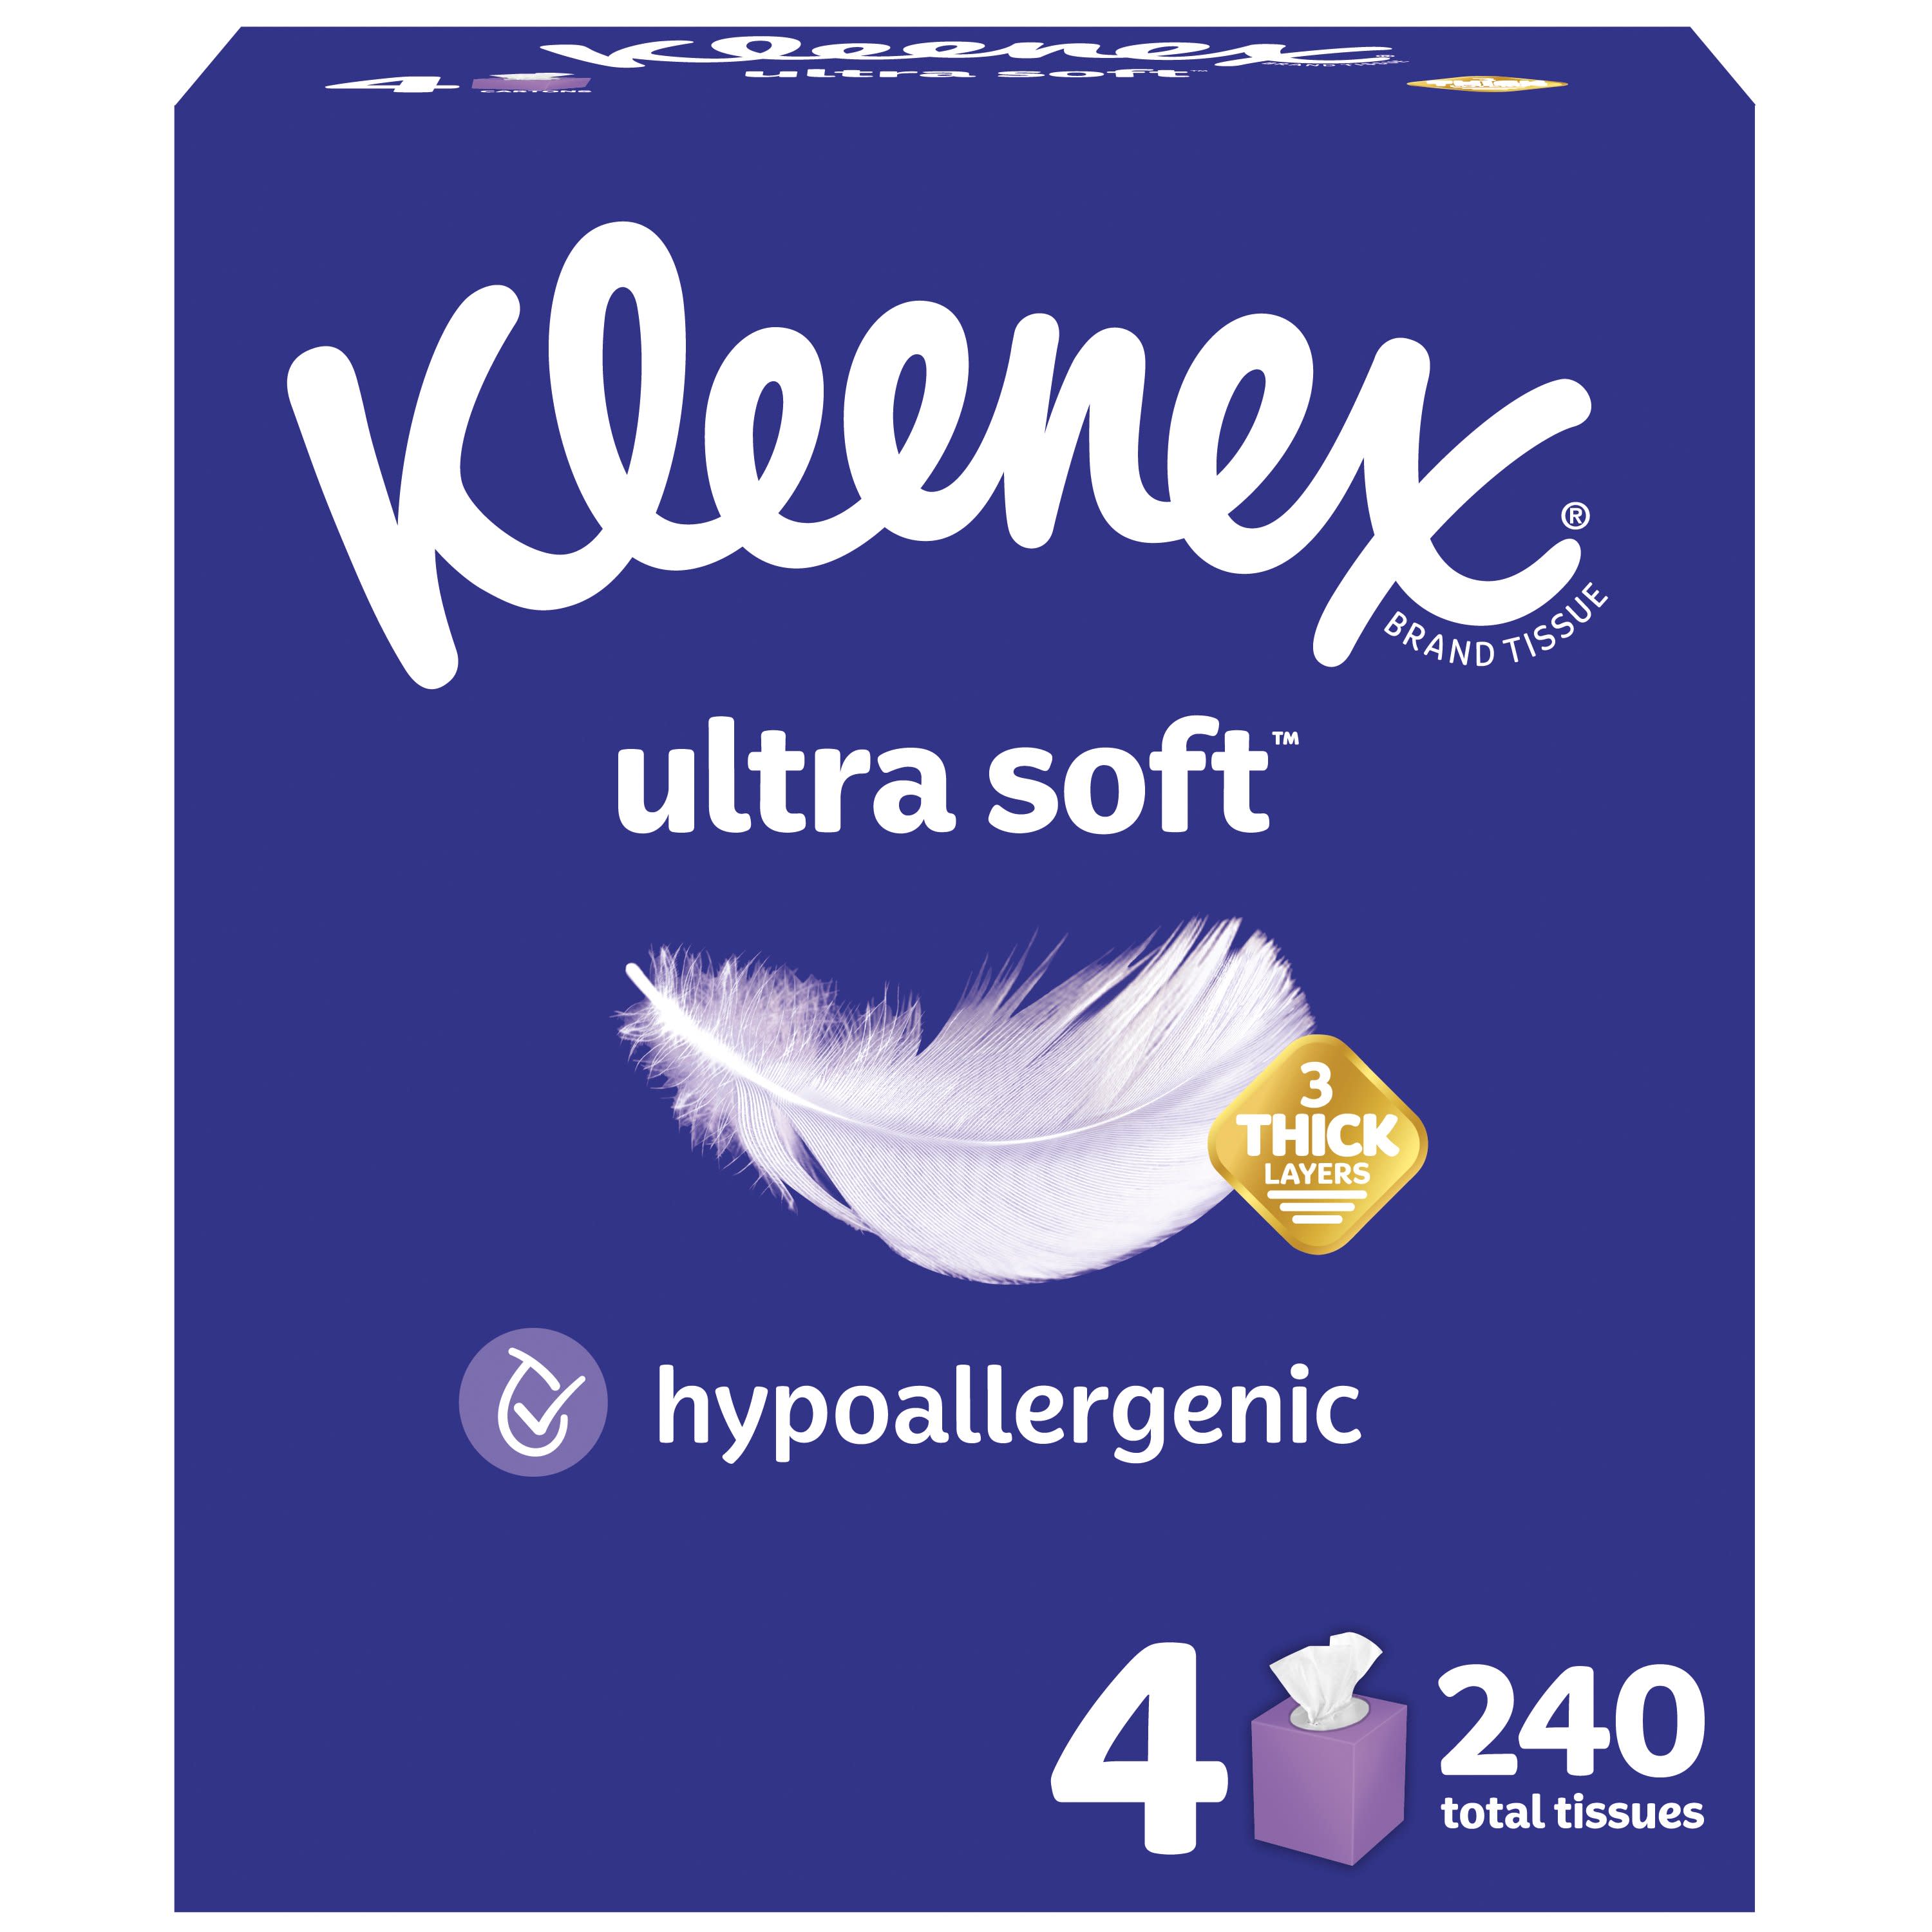 Kleenex Ultra Soft Facial Tissues, 4 Cube Boxes - image 1 of 11